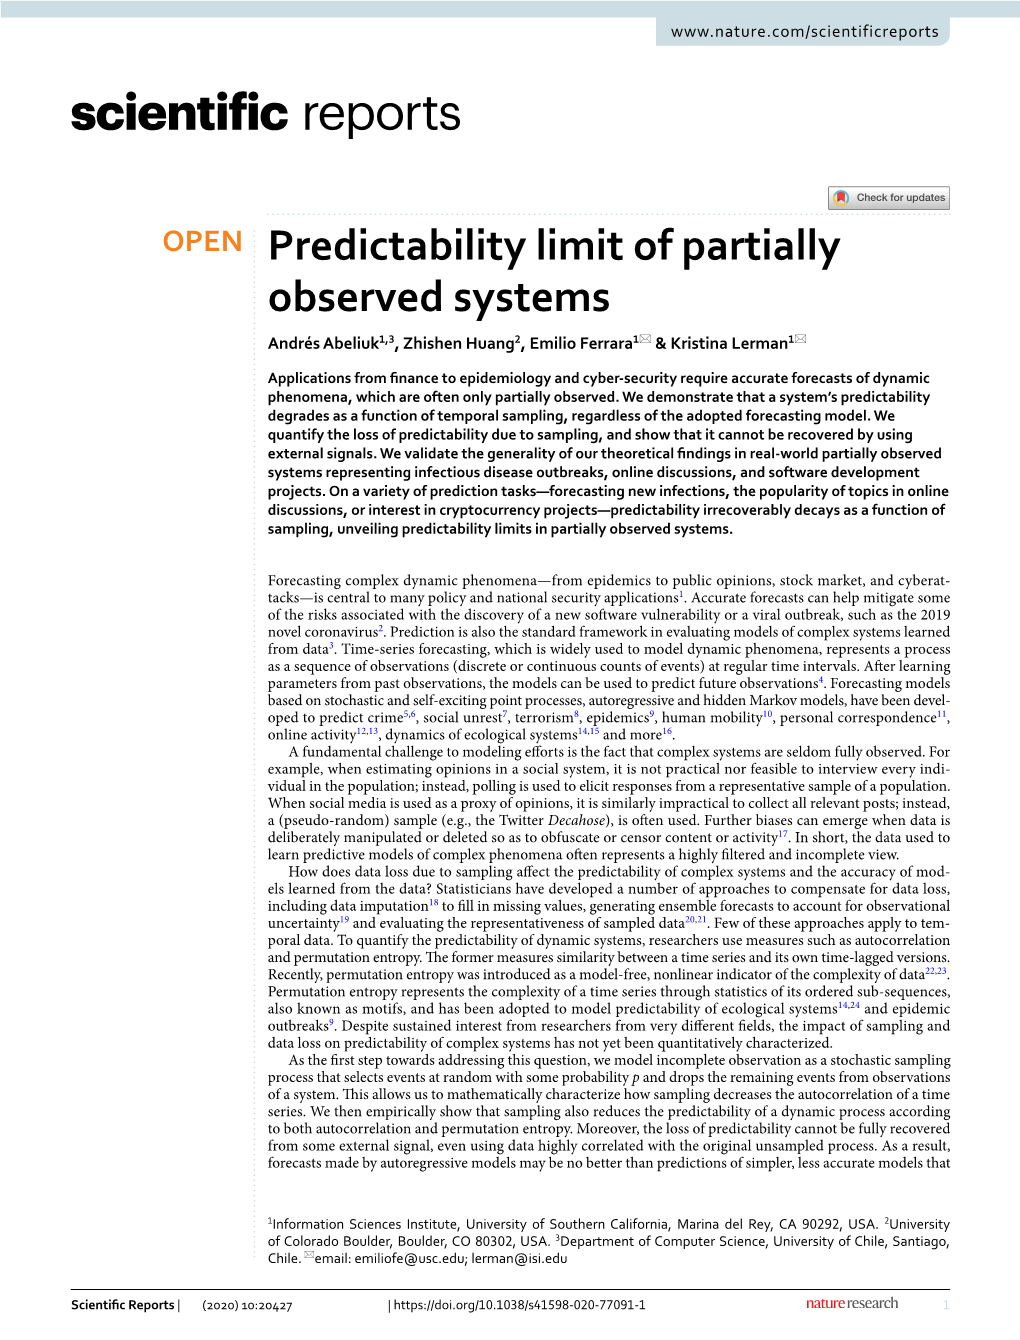 Predictability Limit of Partially Observed Systems Andrés Abeliuk1,3, Zhishen Huang2, Emilio Ferrara1* & Kristina Lerman1*